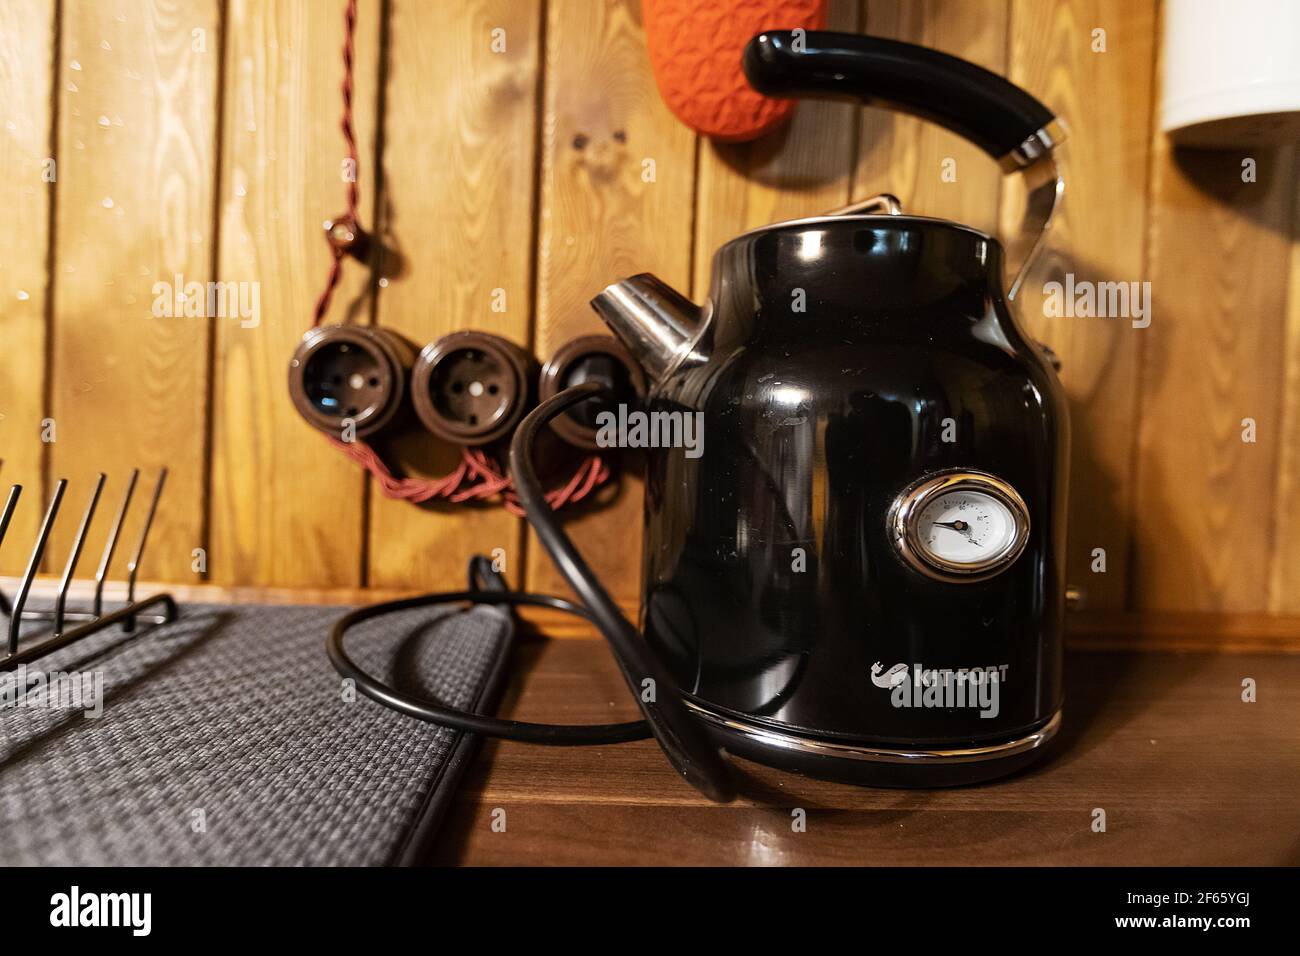 a retro electric kettle sits on the kitchen table. brew tea and boil water Stock Photo